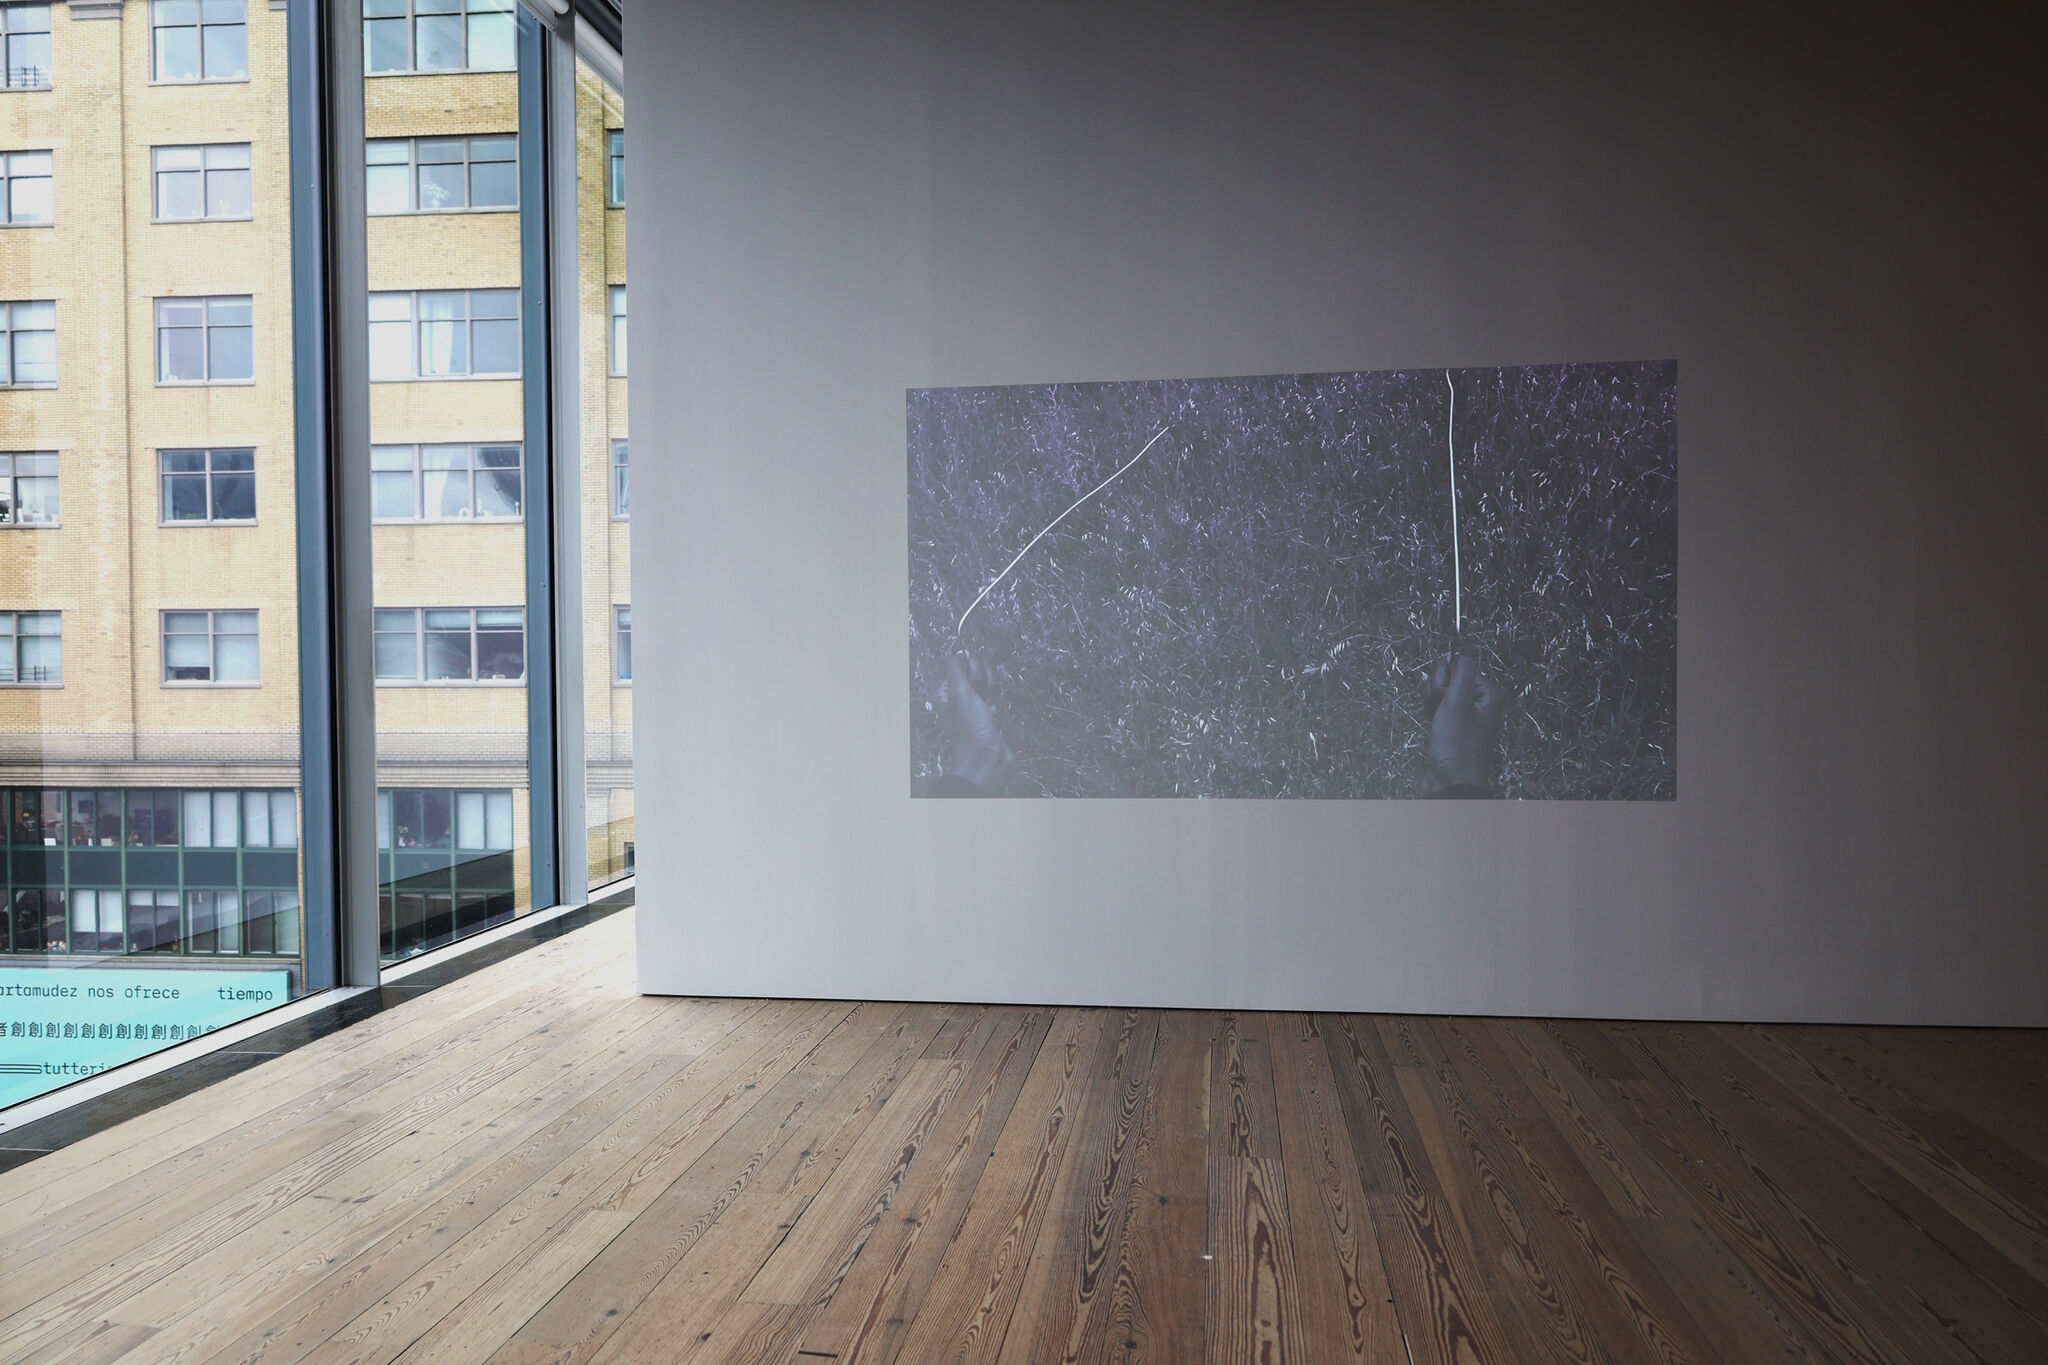 Modern gallery interior with a video projected on a white wall, wooden floor, and large windows overlooking a brick building.